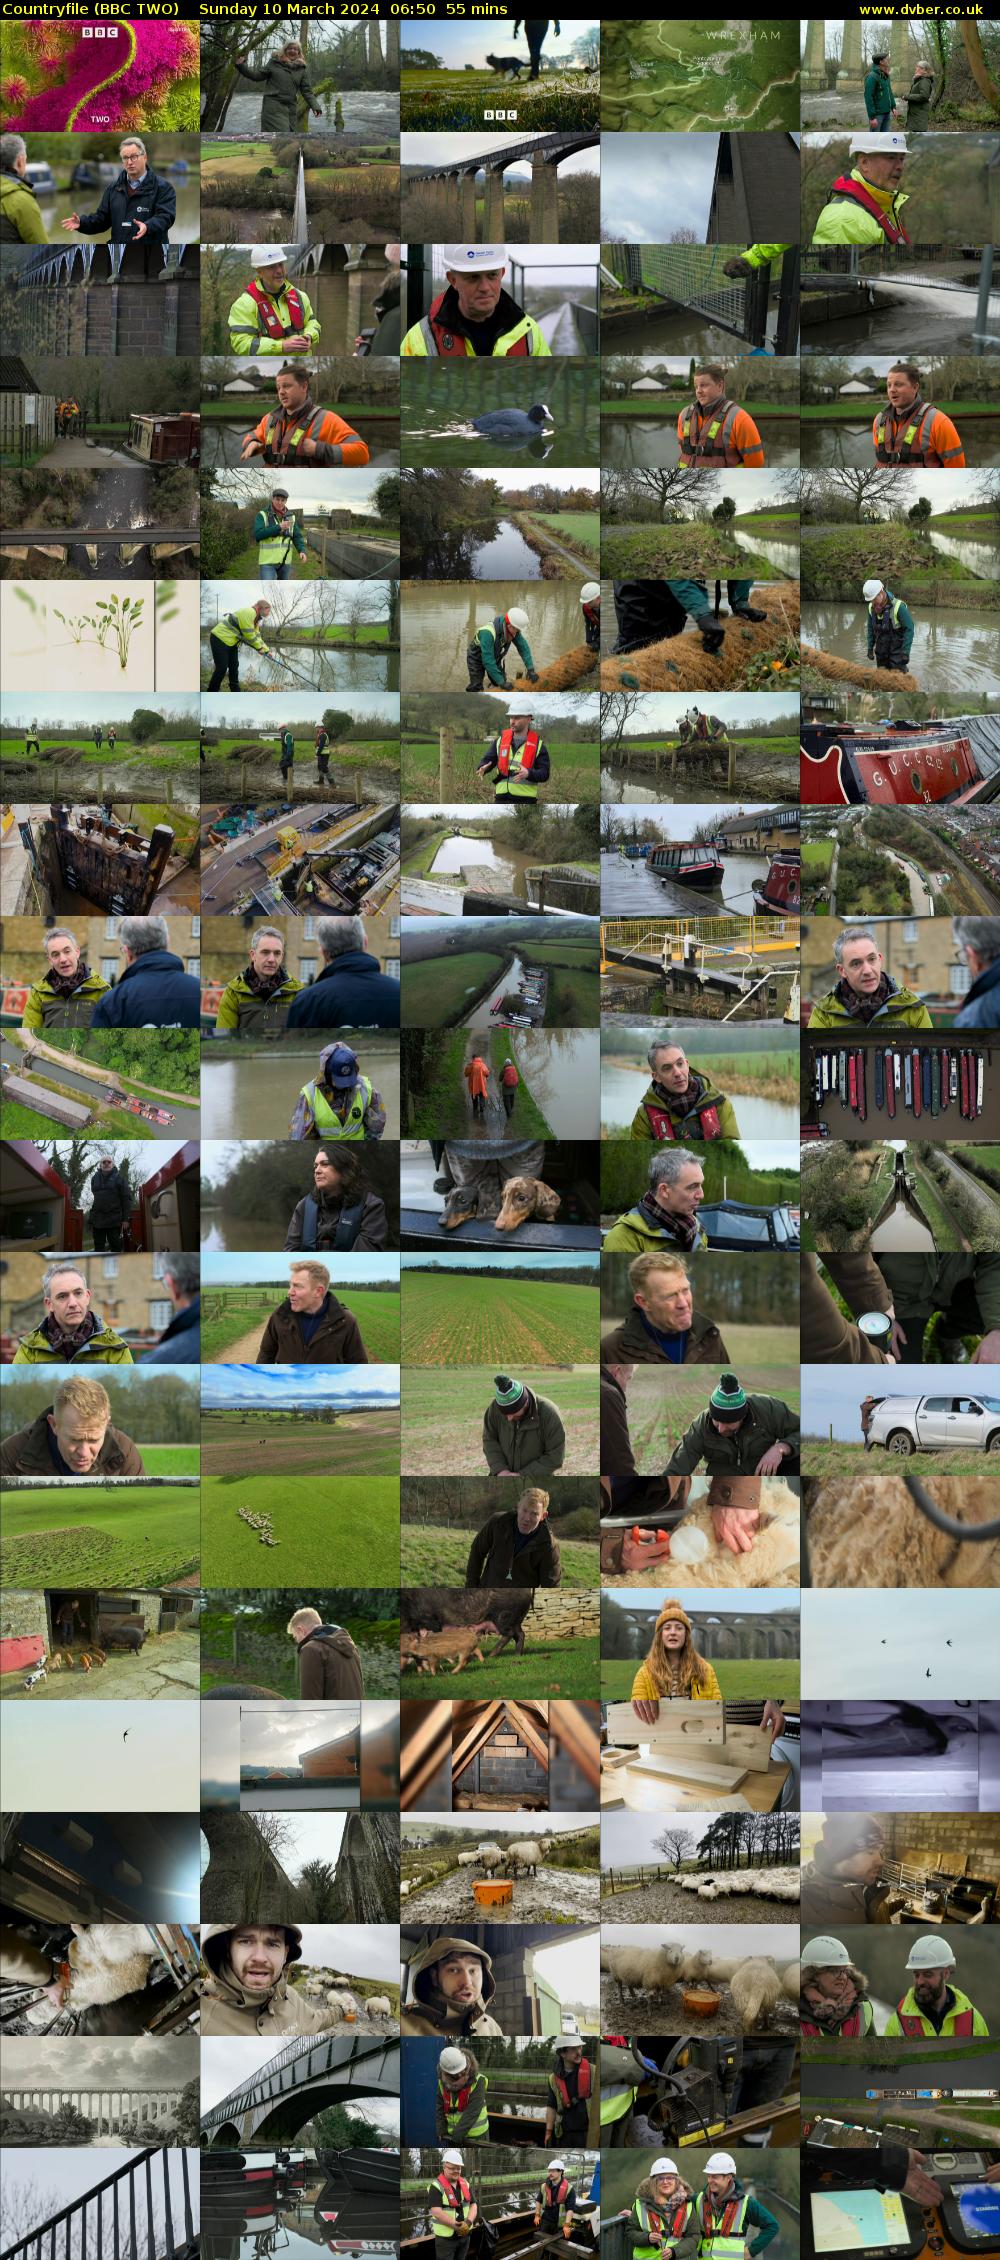 Countryfile (BBC TWO) Sunday 10 March 2024 06:50 - 07:45